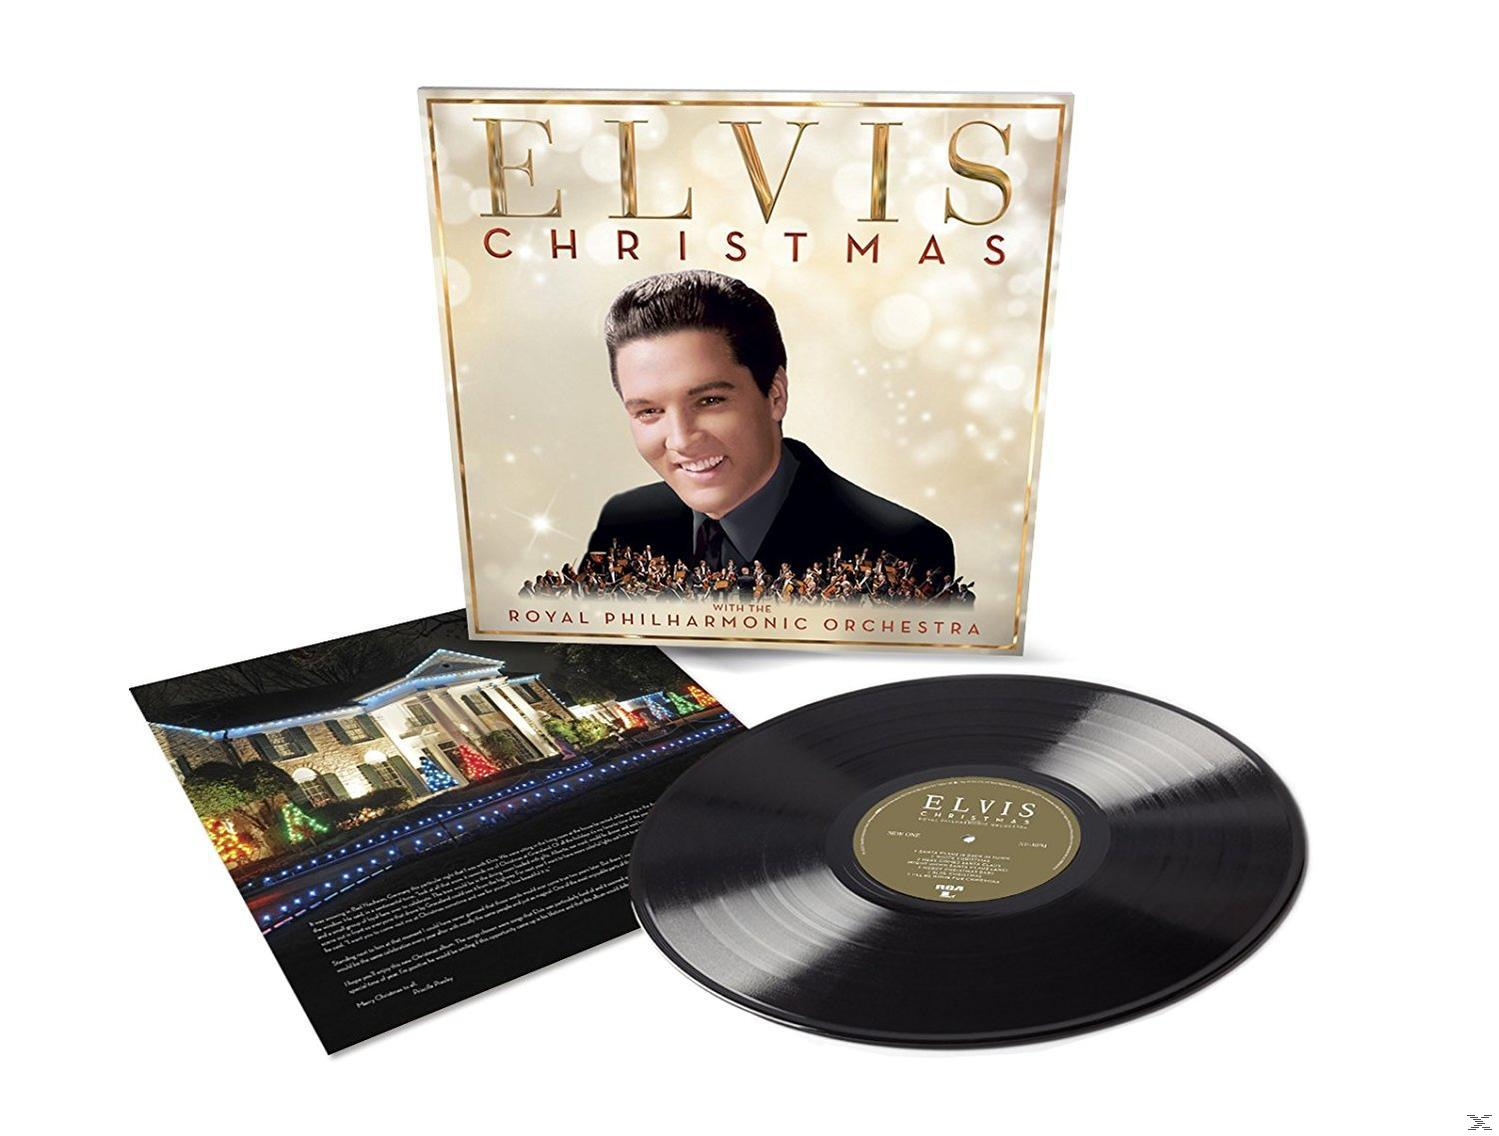 Elvis Presley, Royal Philharmonic Orchestra Or Philharmonic (Vinyl) the Royal Elvis with - Christmas and 